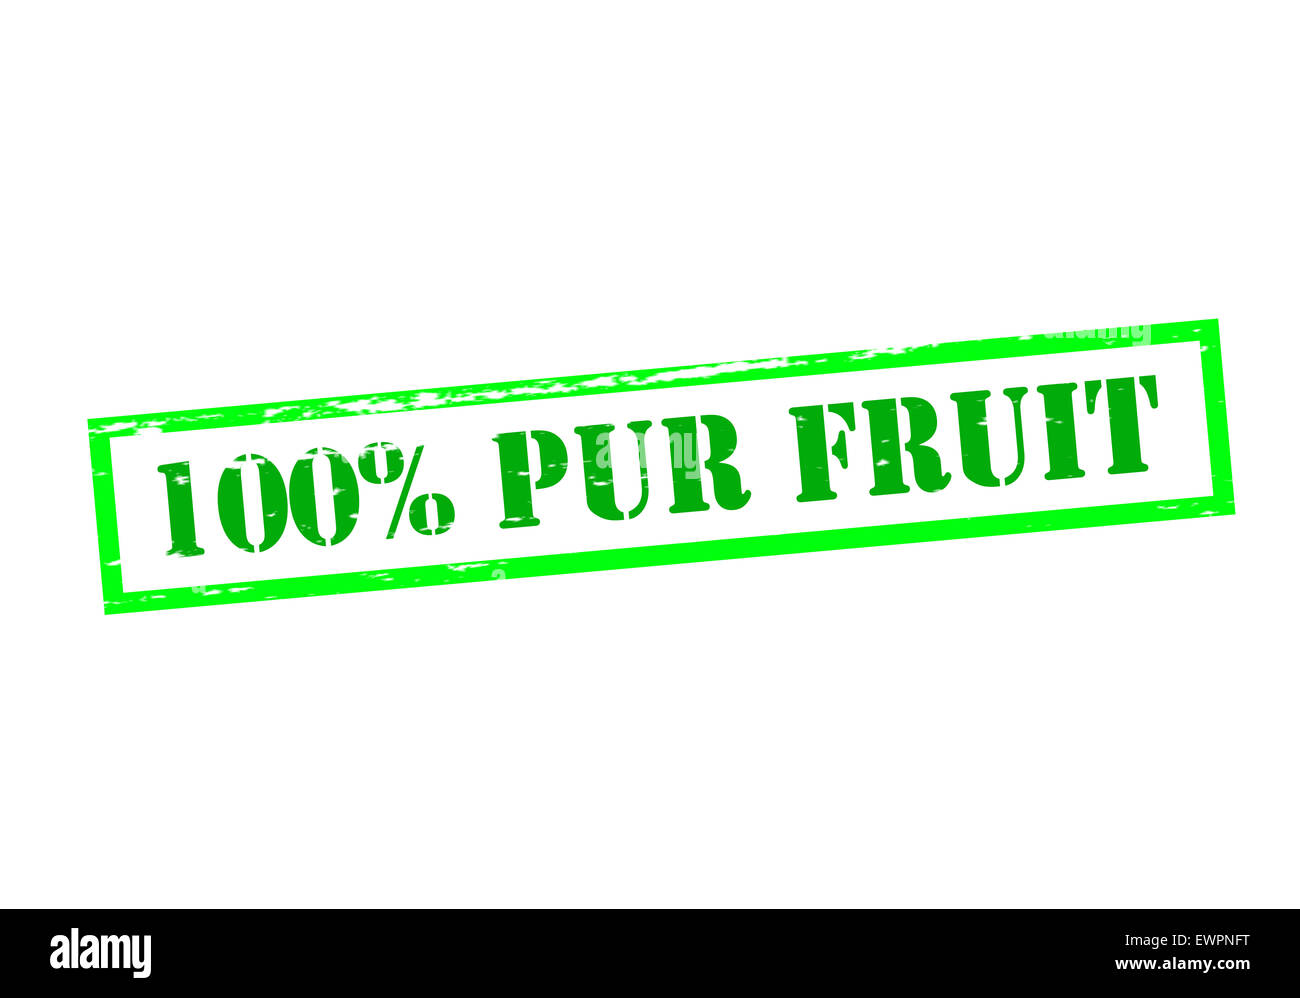 Rubber stamp with text one hundred percent pur fruit inside, illustration Stock Photo